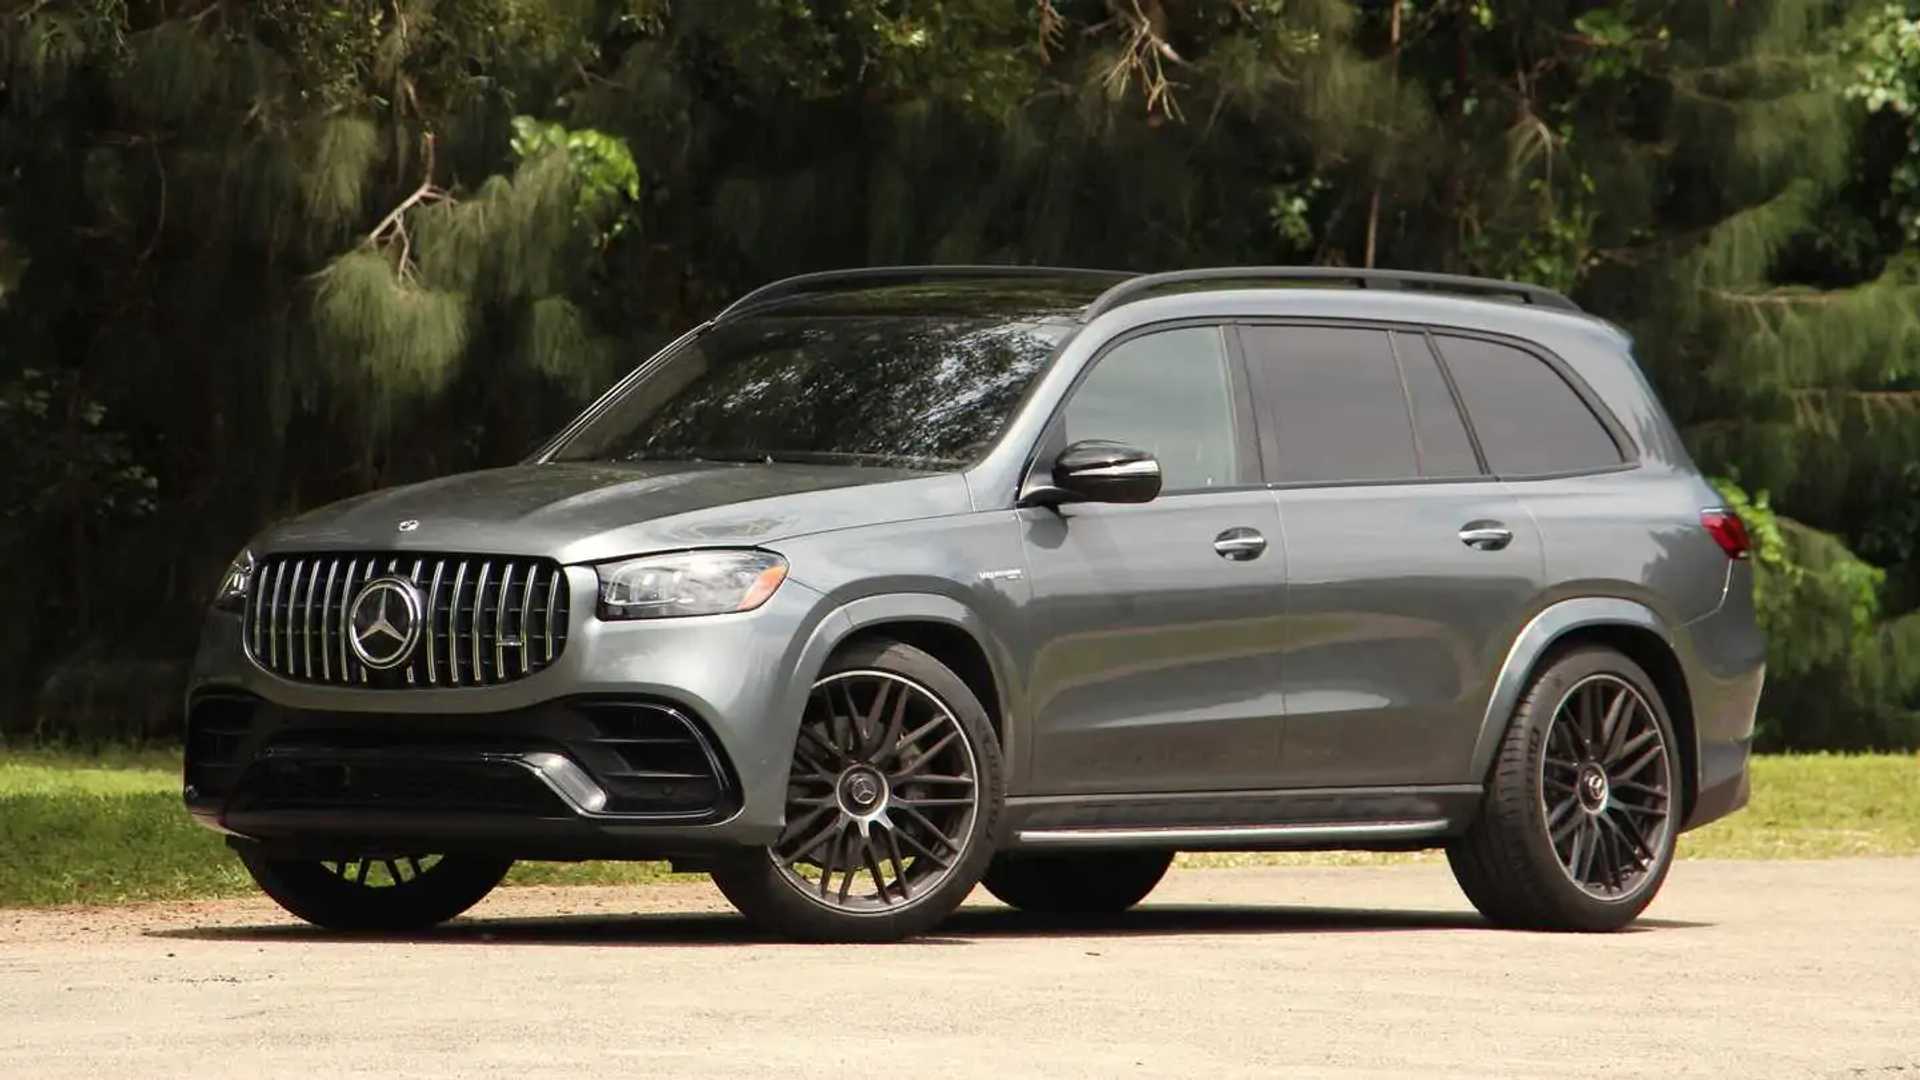 2021 Mercedes-AMG GLS 63: Pros And Cons